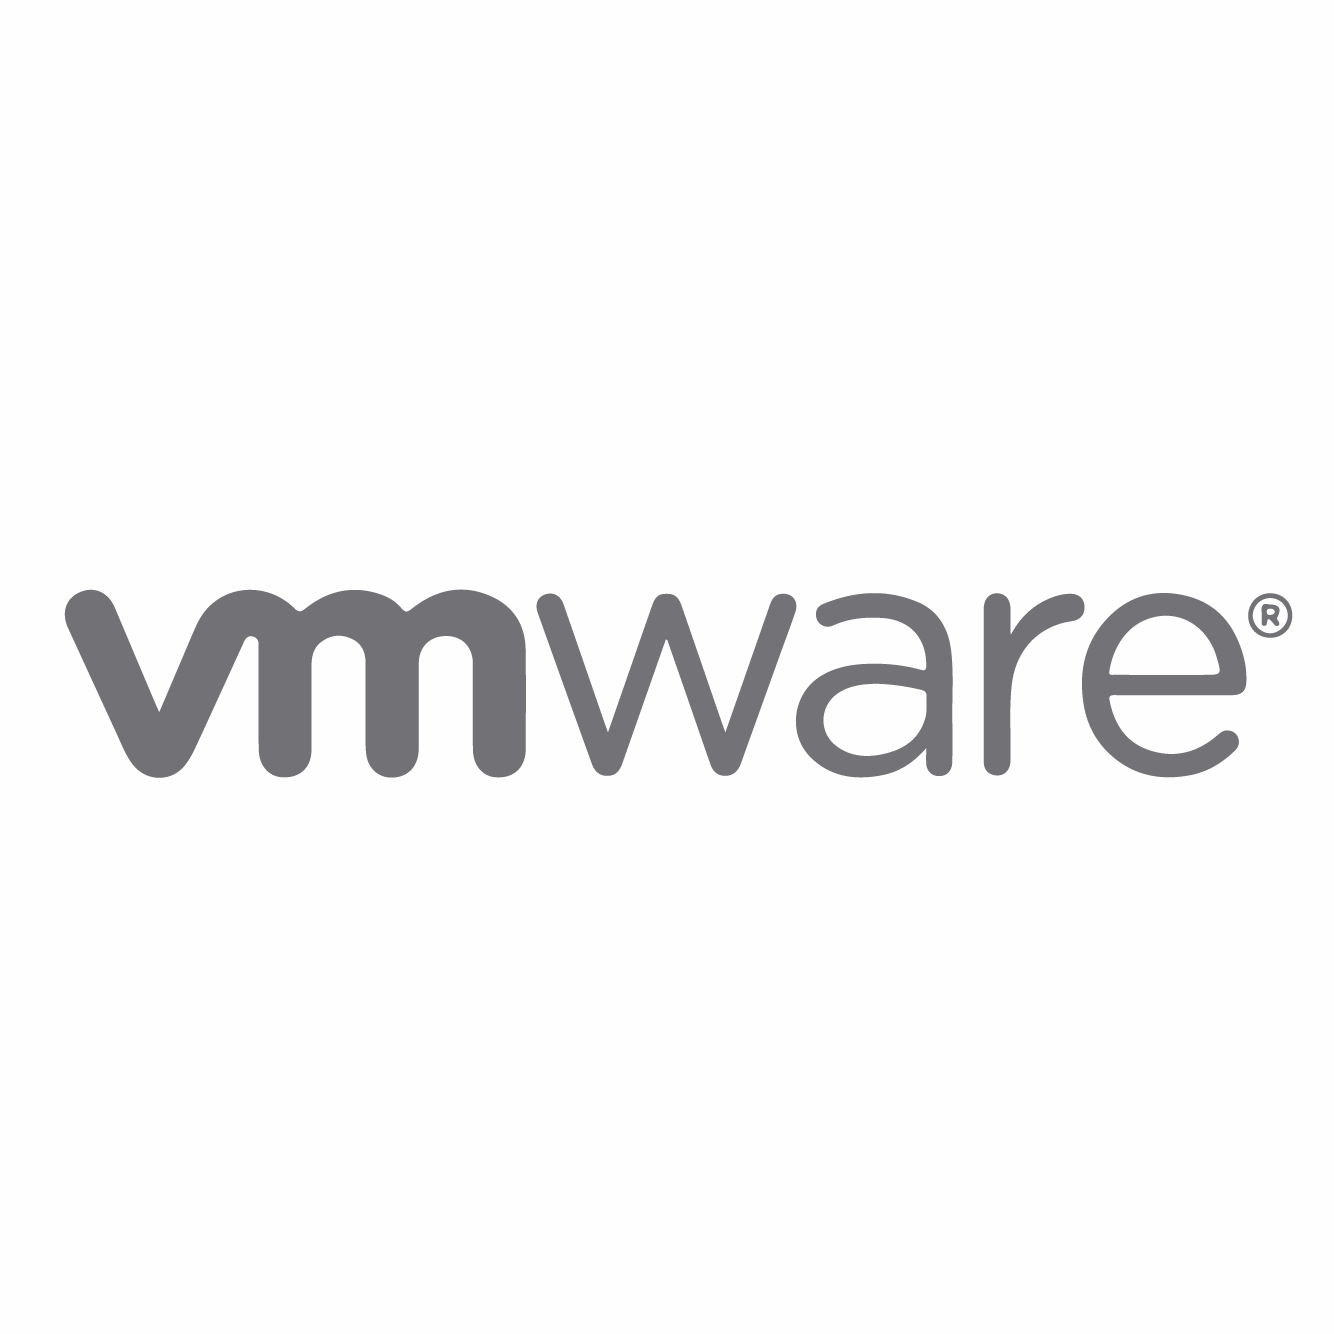 http://securetech.ae/wp-content/uploads/2019/02/11.VMWARE.png